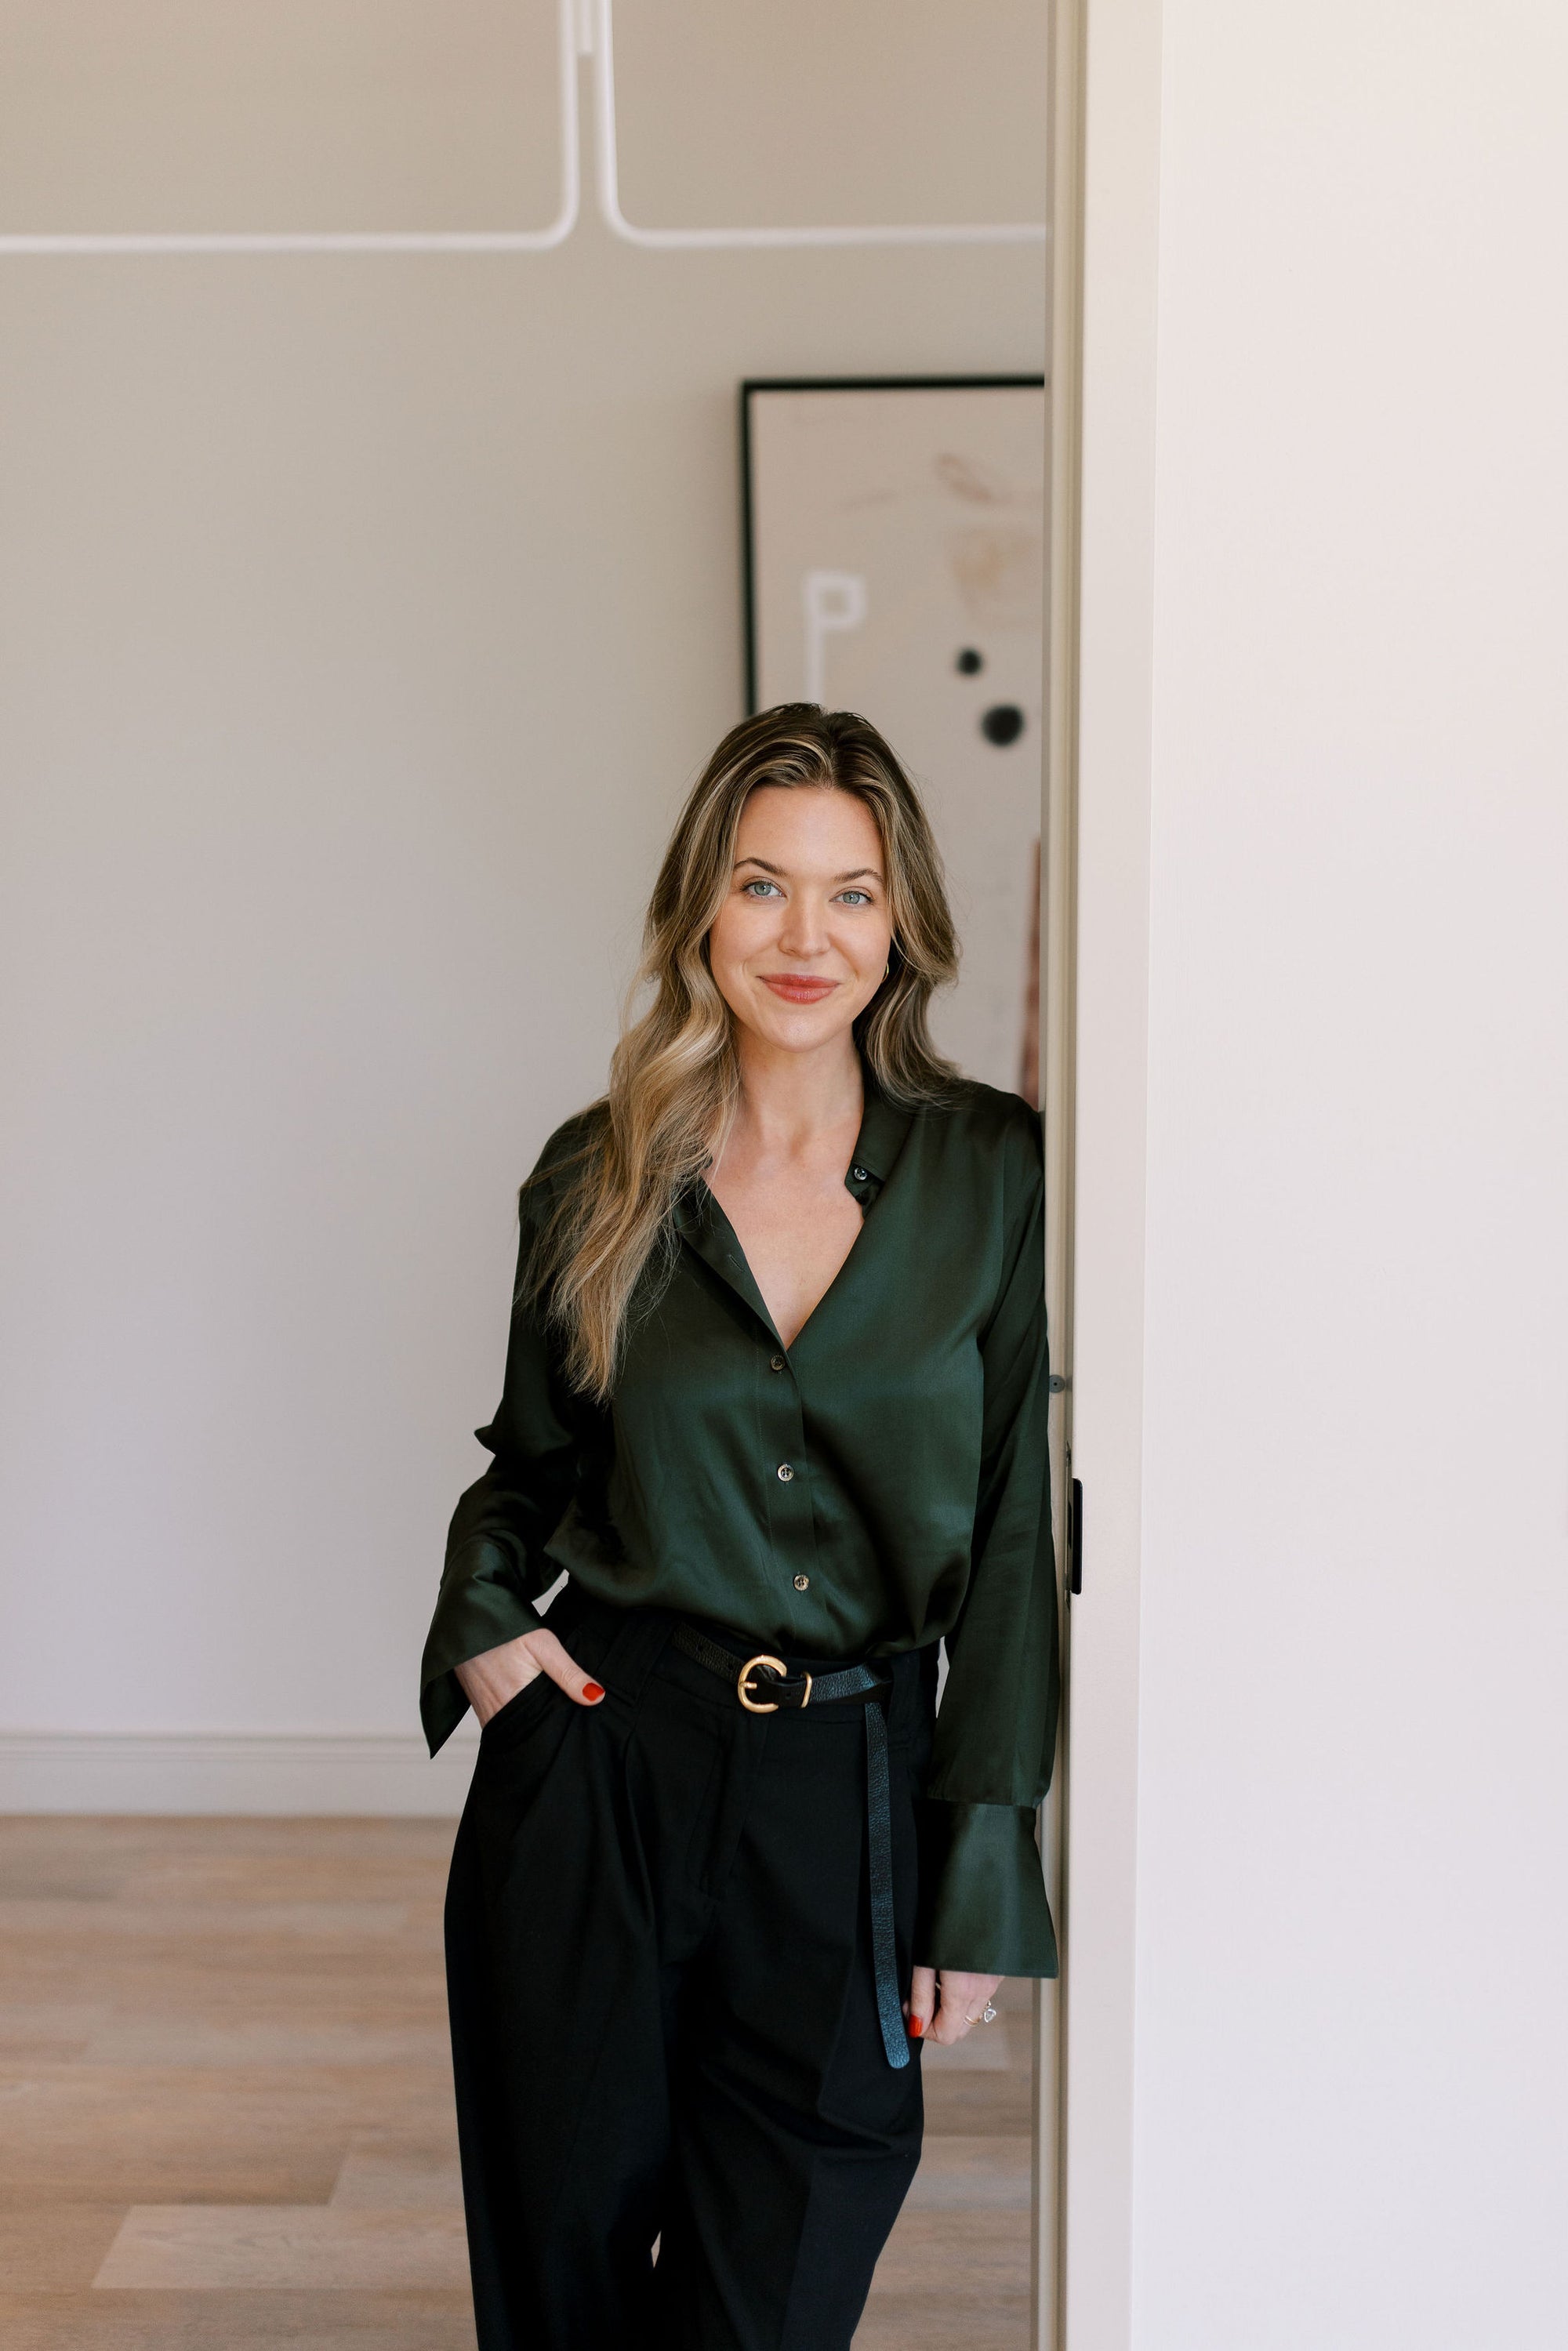 Meet Our Founder + CEO, Maegan Griffin